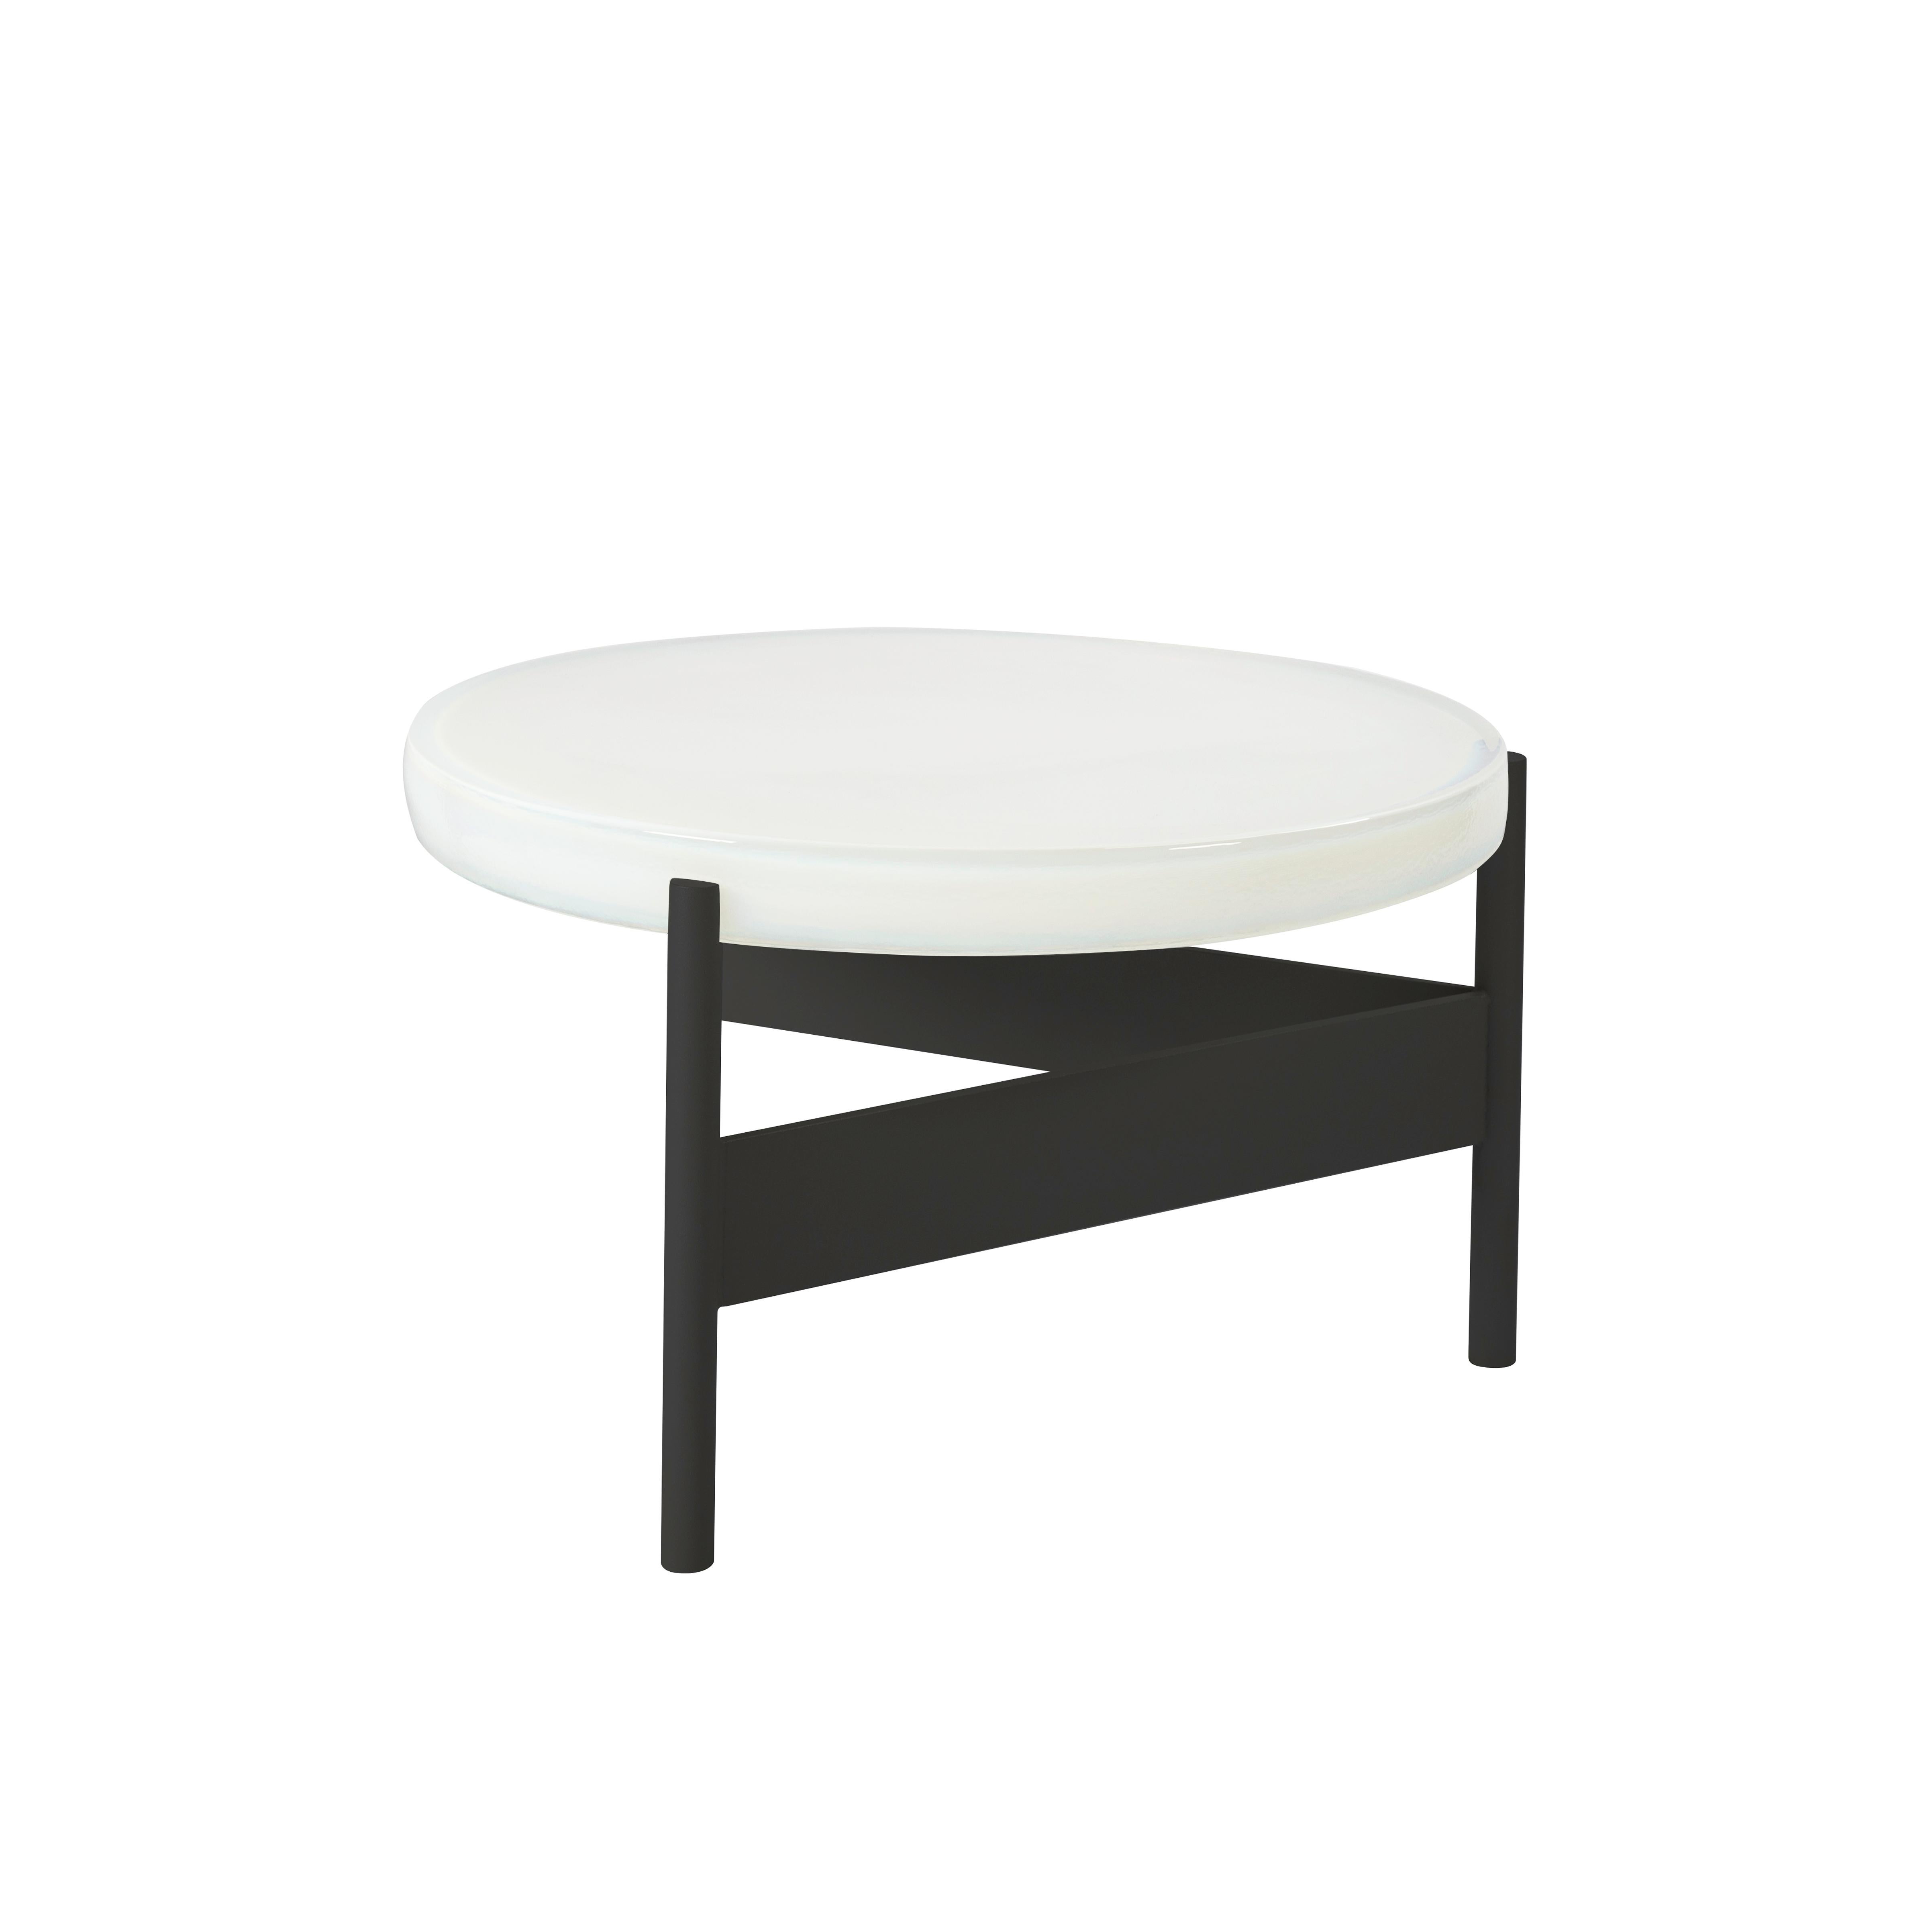 Alwa two big white black coffee table by Pulpo.
Dimensions: D56 x H35 cm.
Materials: casted glass; powder coated steel.

Also available in different finishes.

Normally, glass is regarded as being lightweight with sharp edges. In contrast,